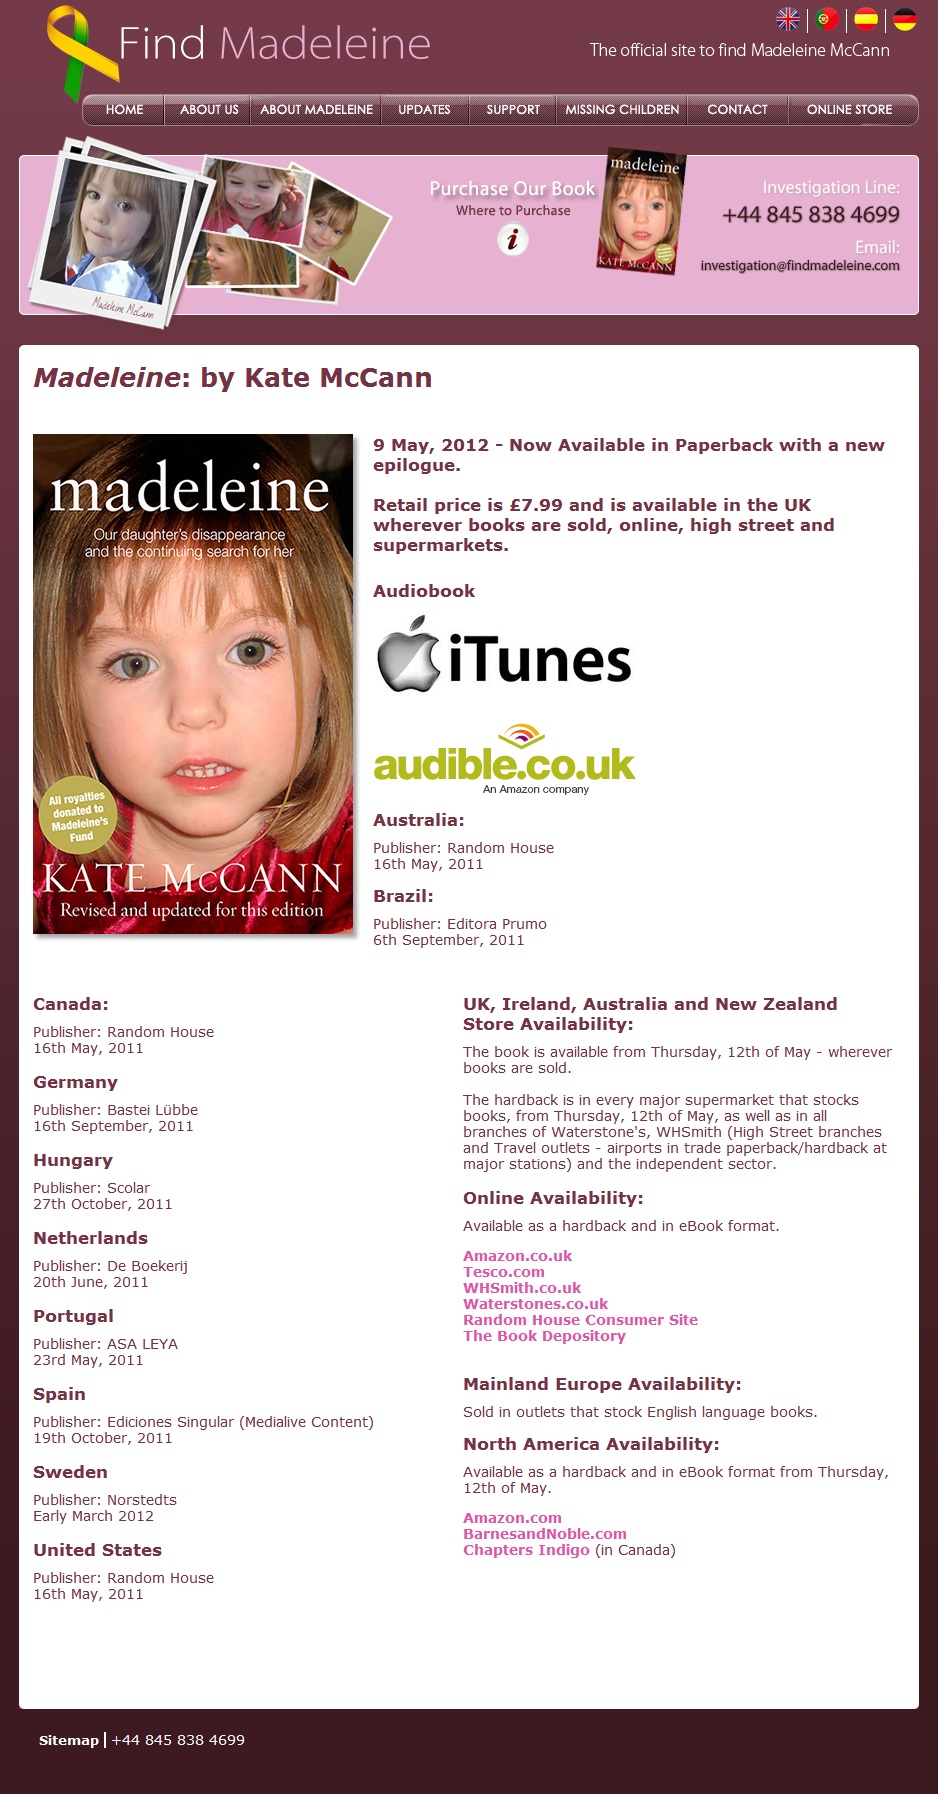 madeleine by Kate McCann released in paperback and on Audiobook, 09 May 2012